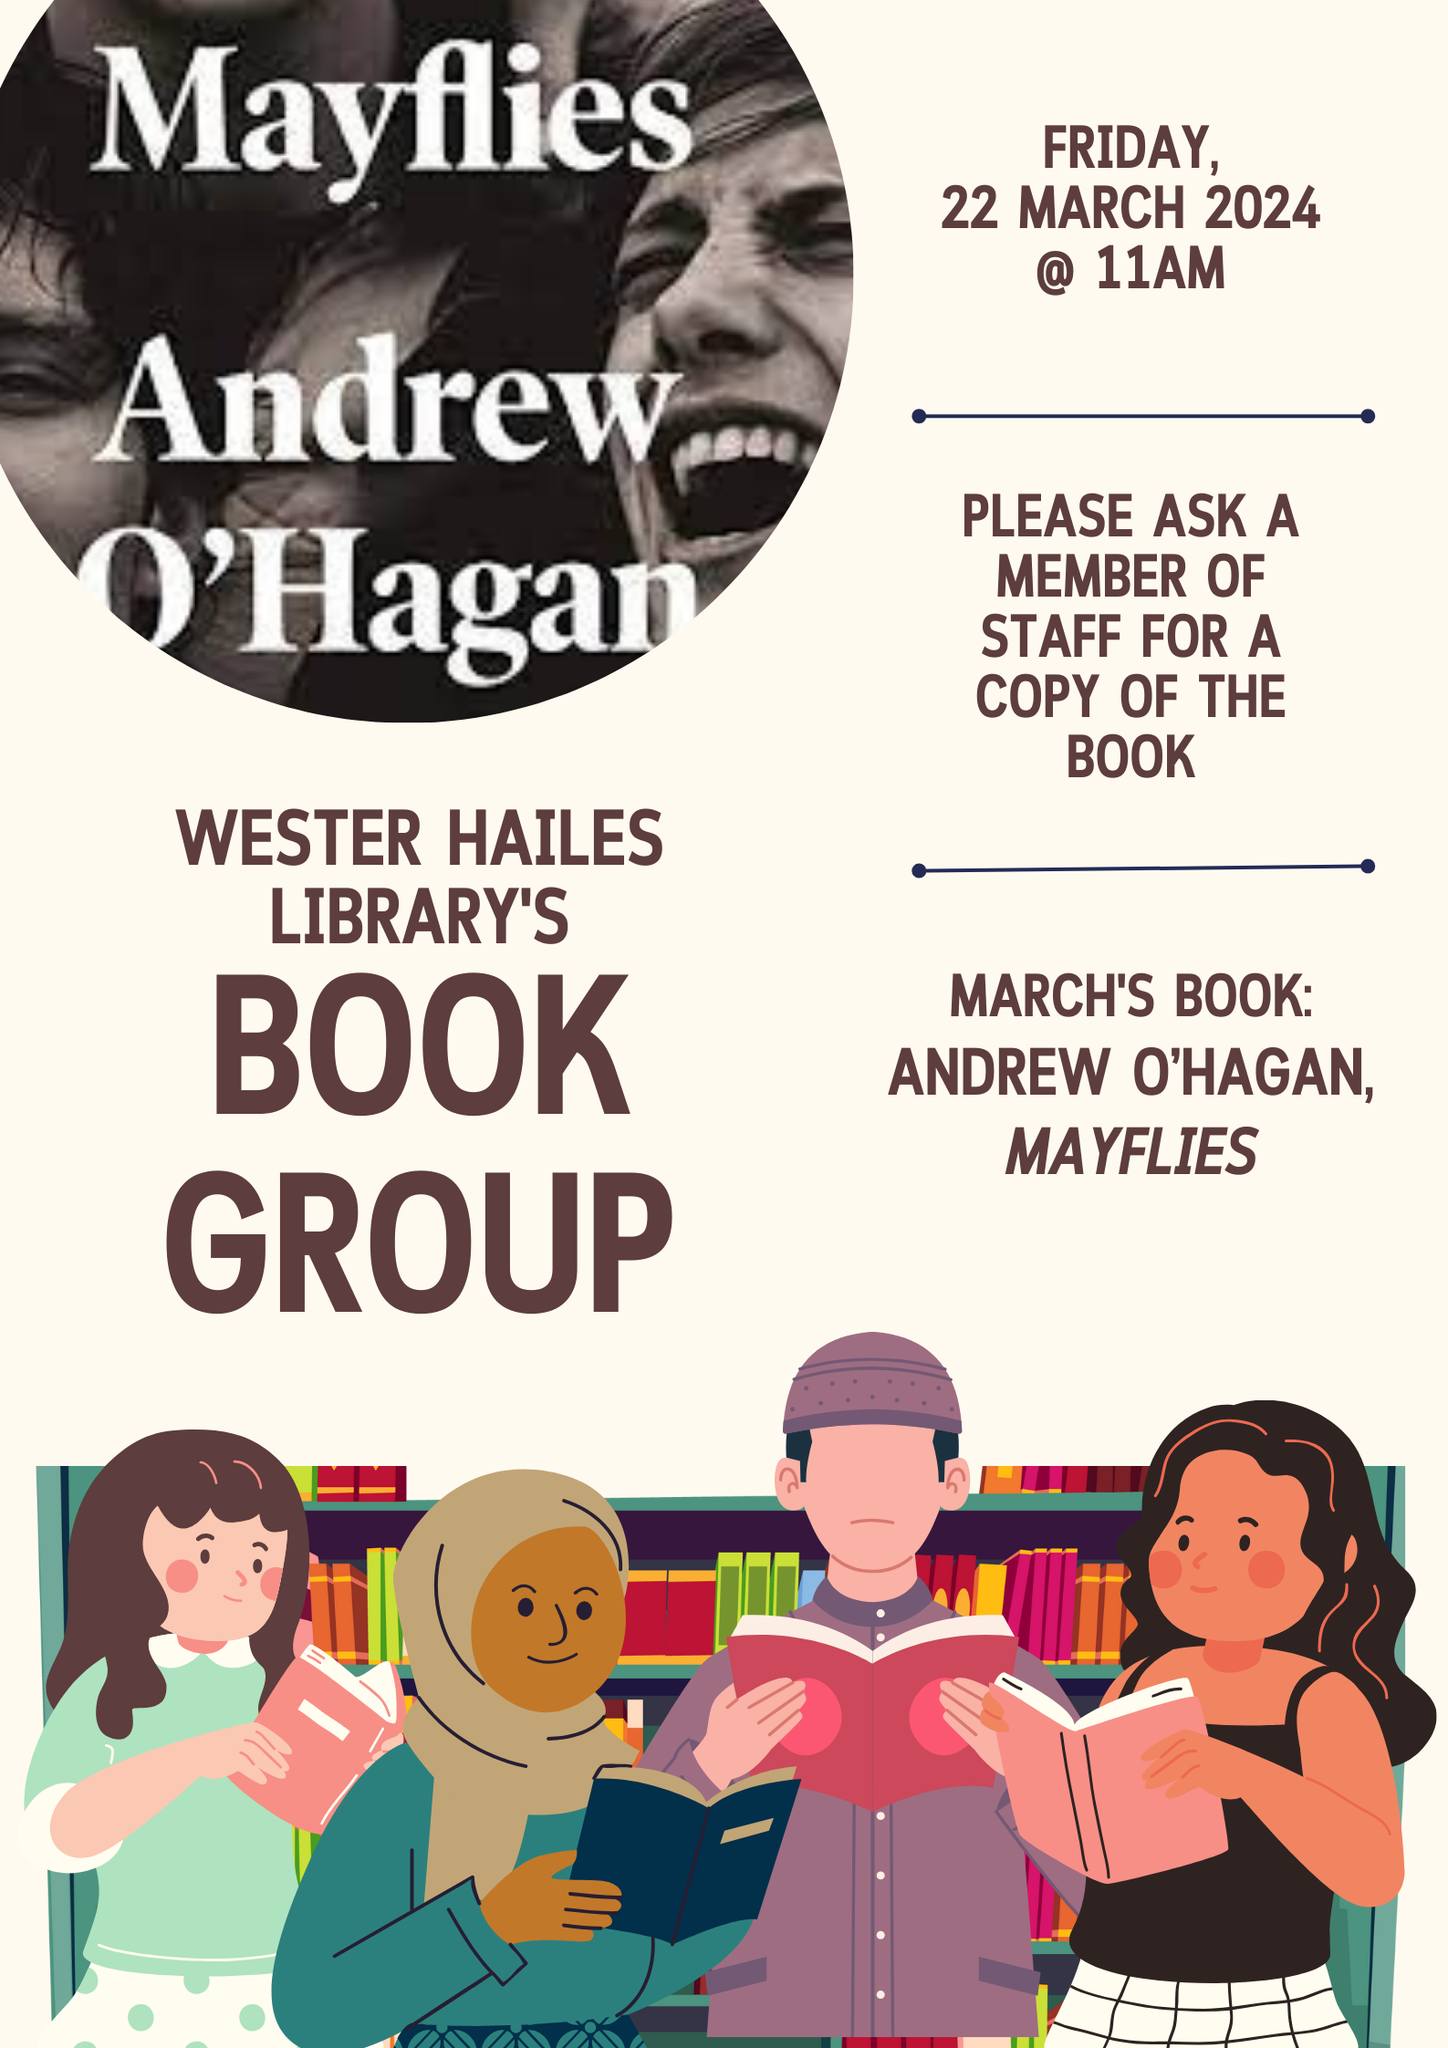 library book group